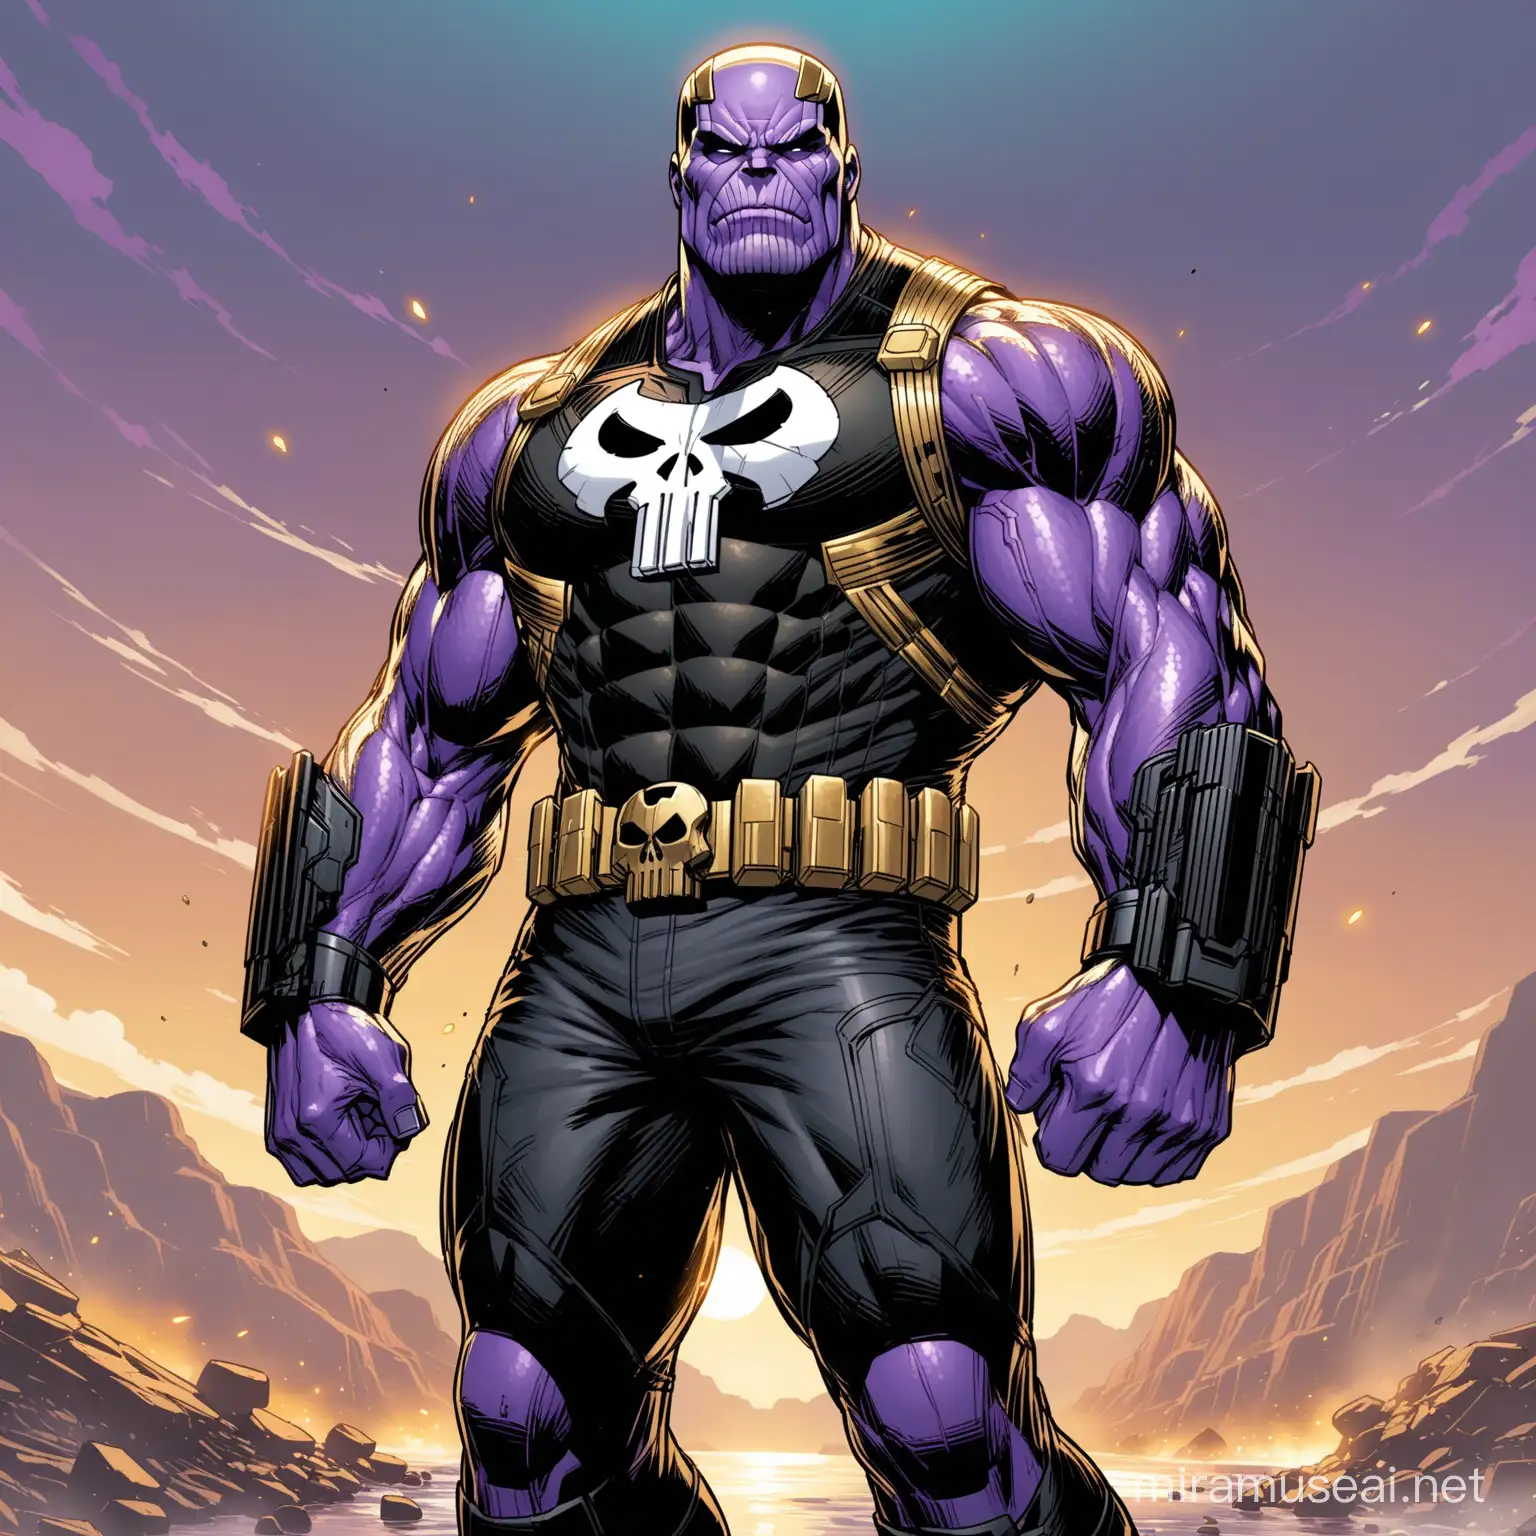 combine  Thanos with Punisher, creating a new and unique heroic figure